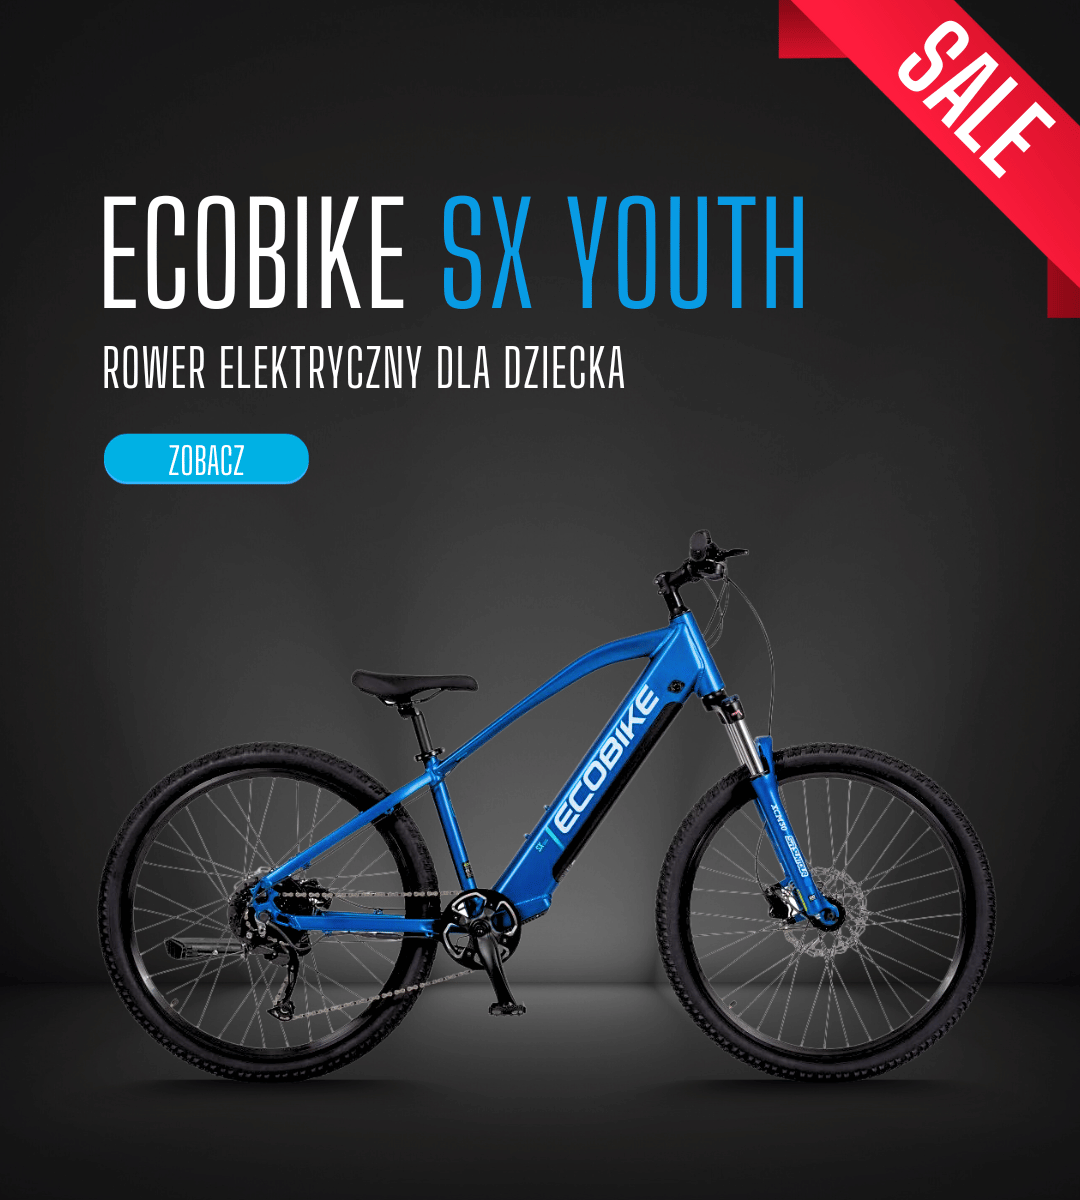 Ecobike SX youth mobile